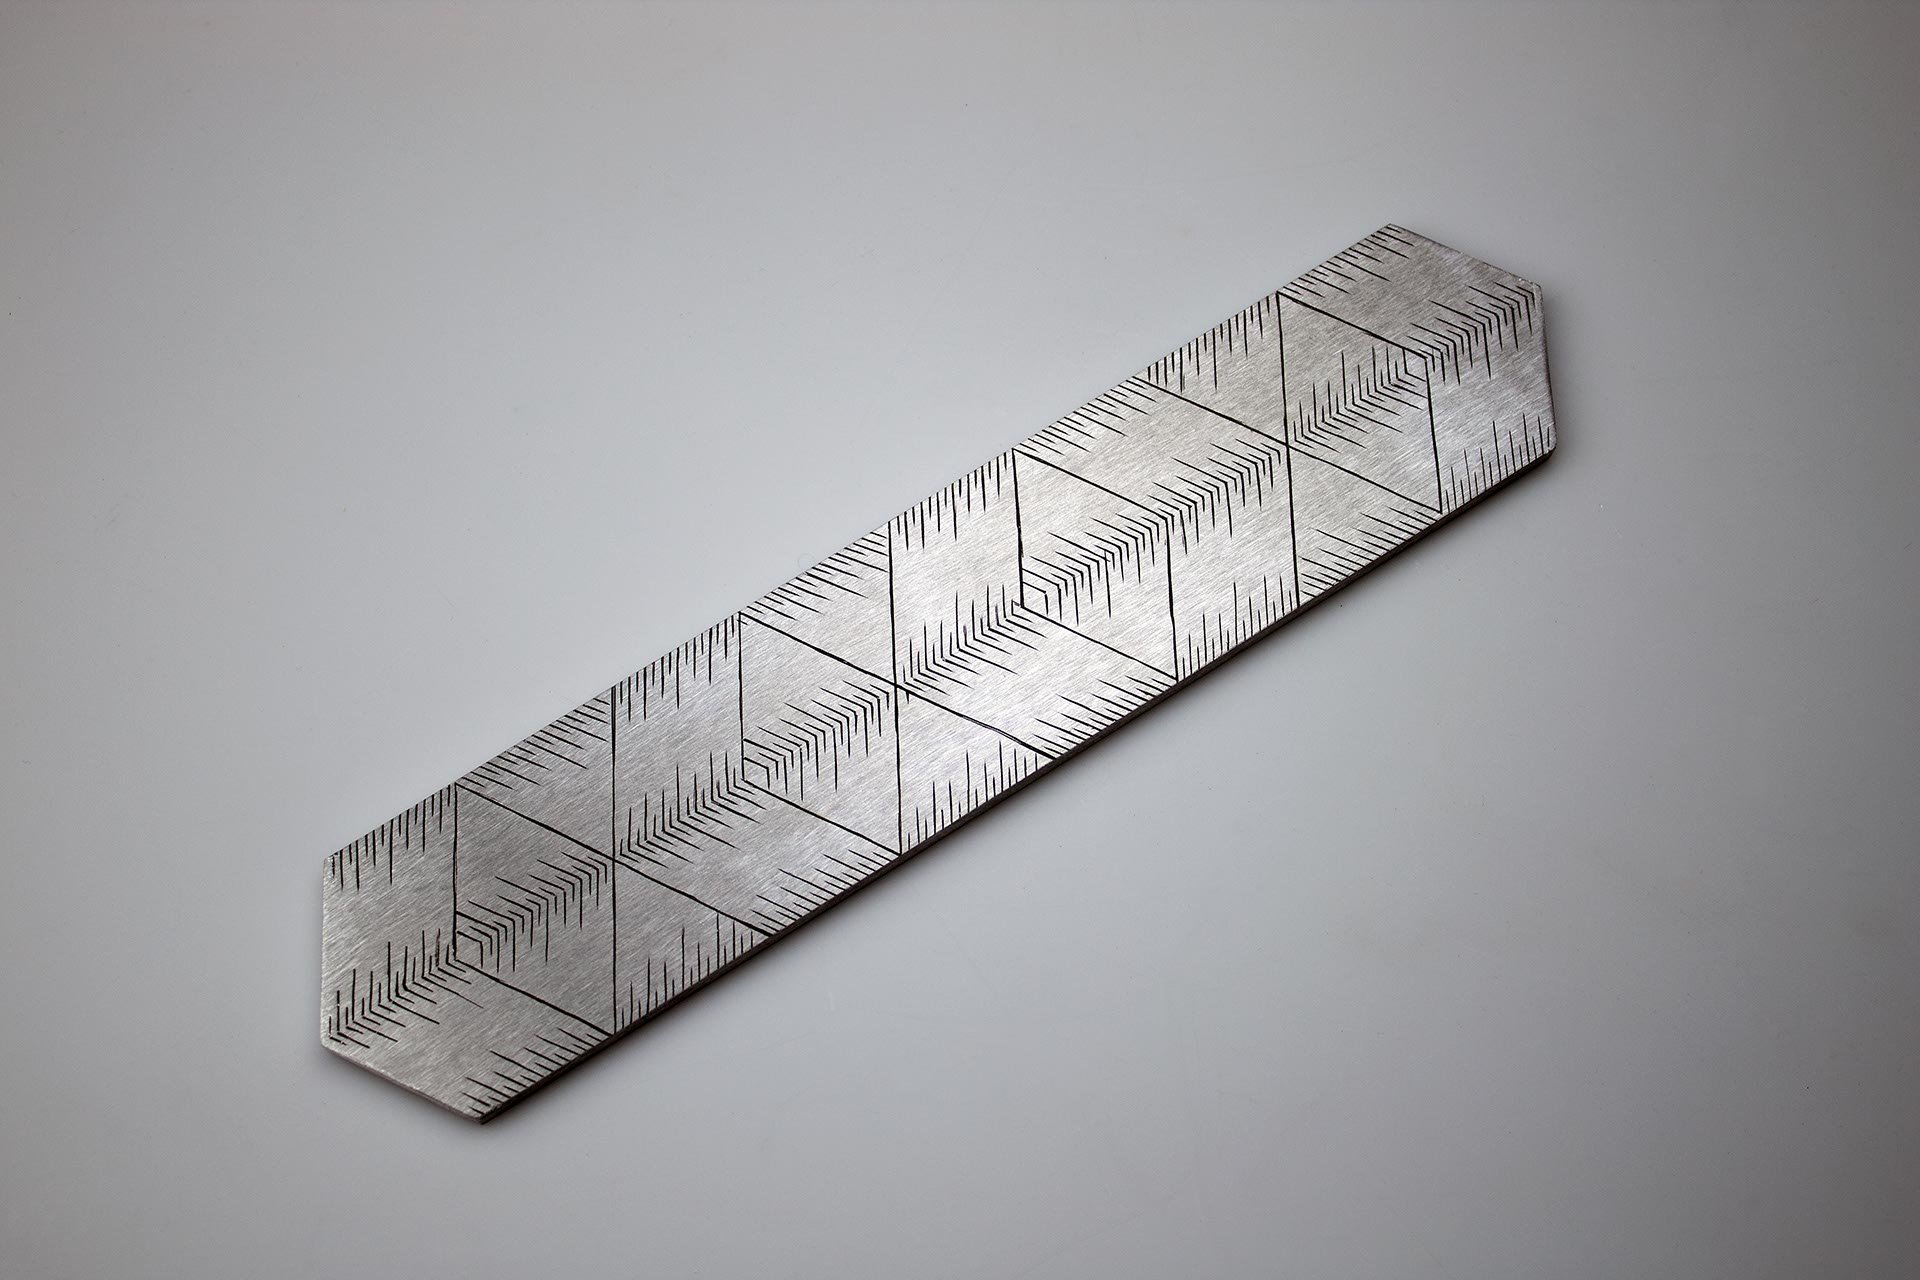 Instrument #46, hand engraved aluminum and ink. 9.625” x 2” x .25"